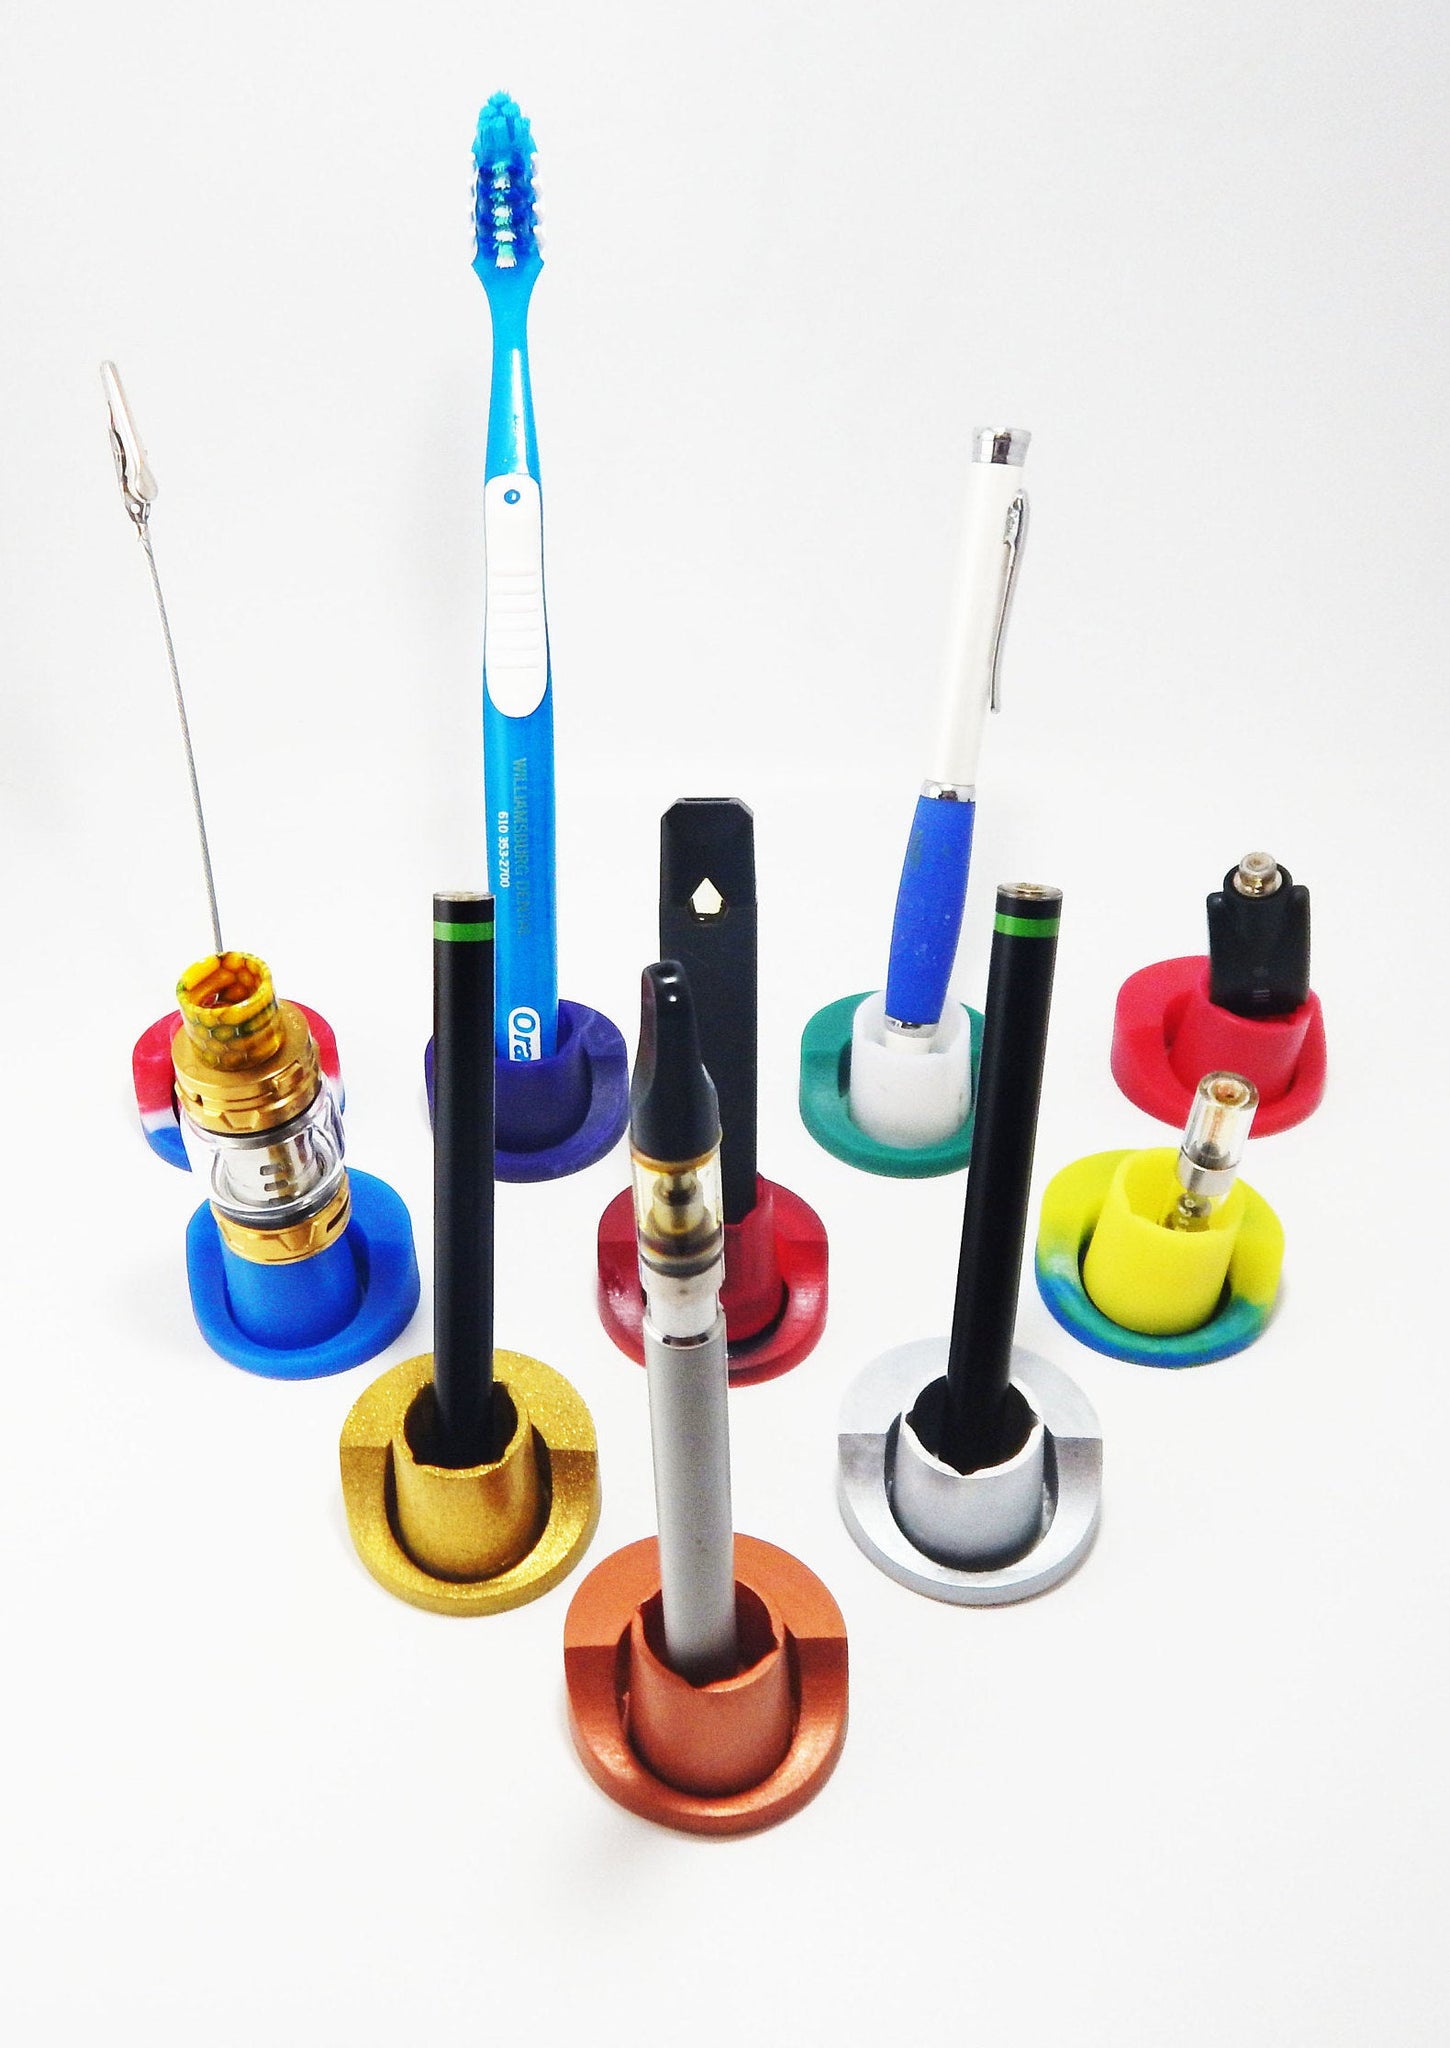 510 Pen Cartridge Holder Small Spiral Stand With Free Shipping 